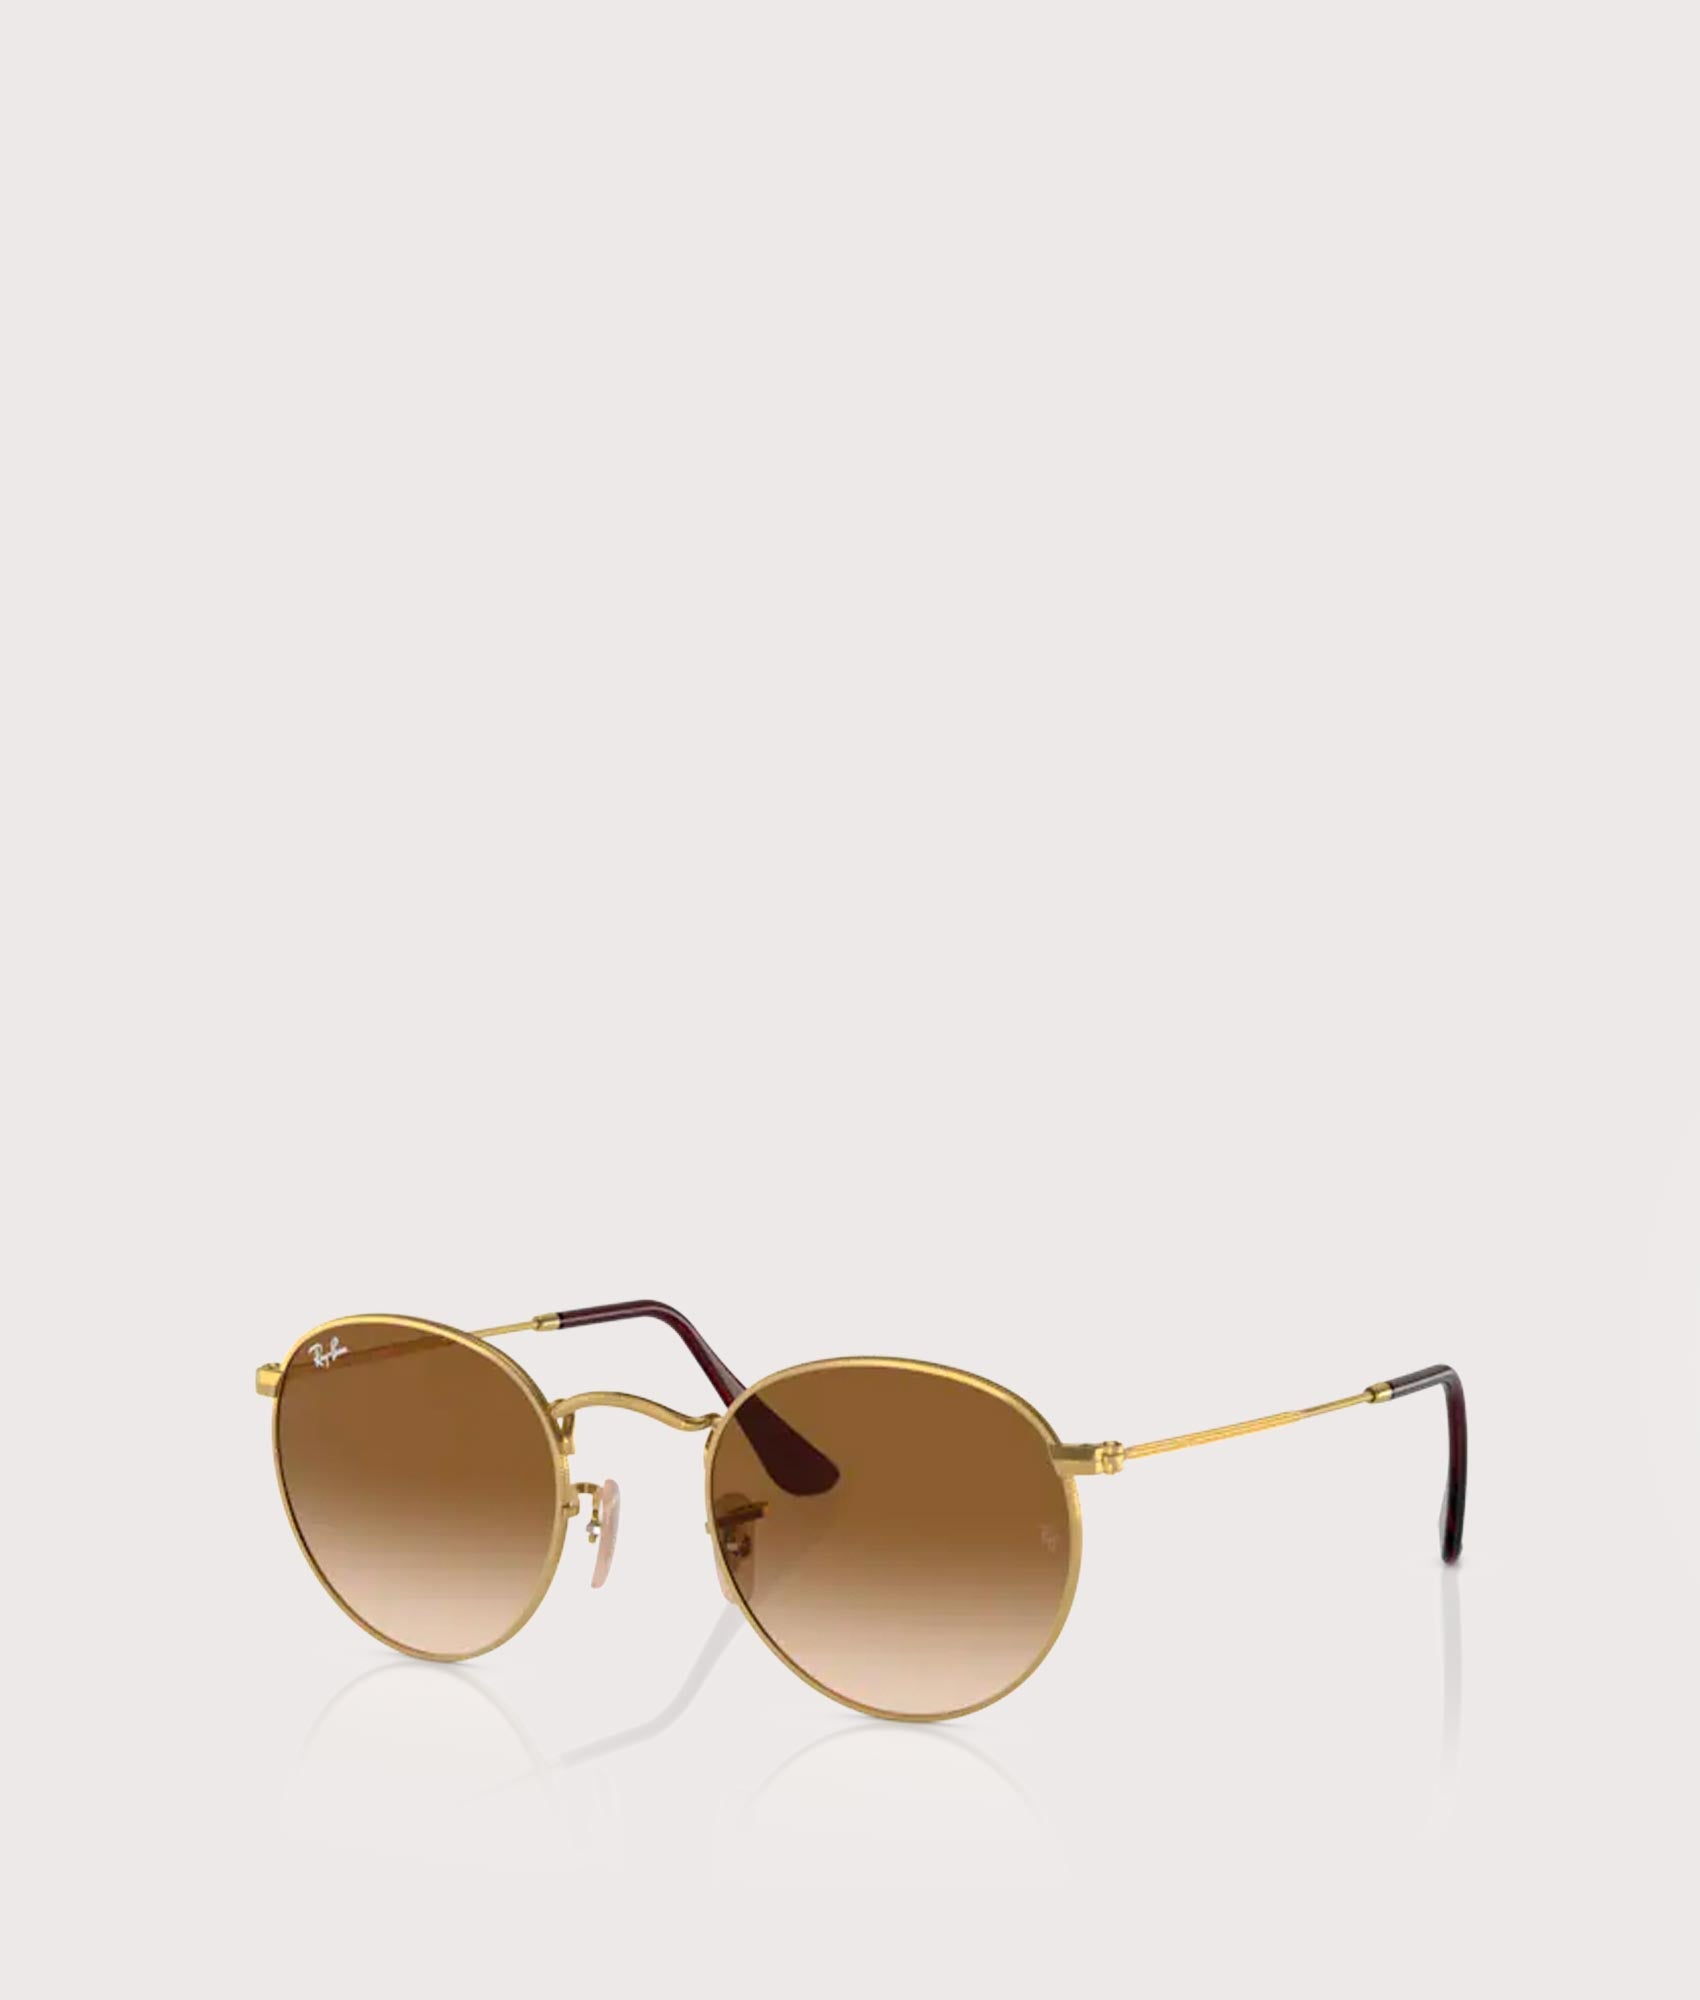 Ray-Ban Mens Round Metal Sunglasses - Colour: 001/51 Polished Gold-Brown Lens - Size: 50